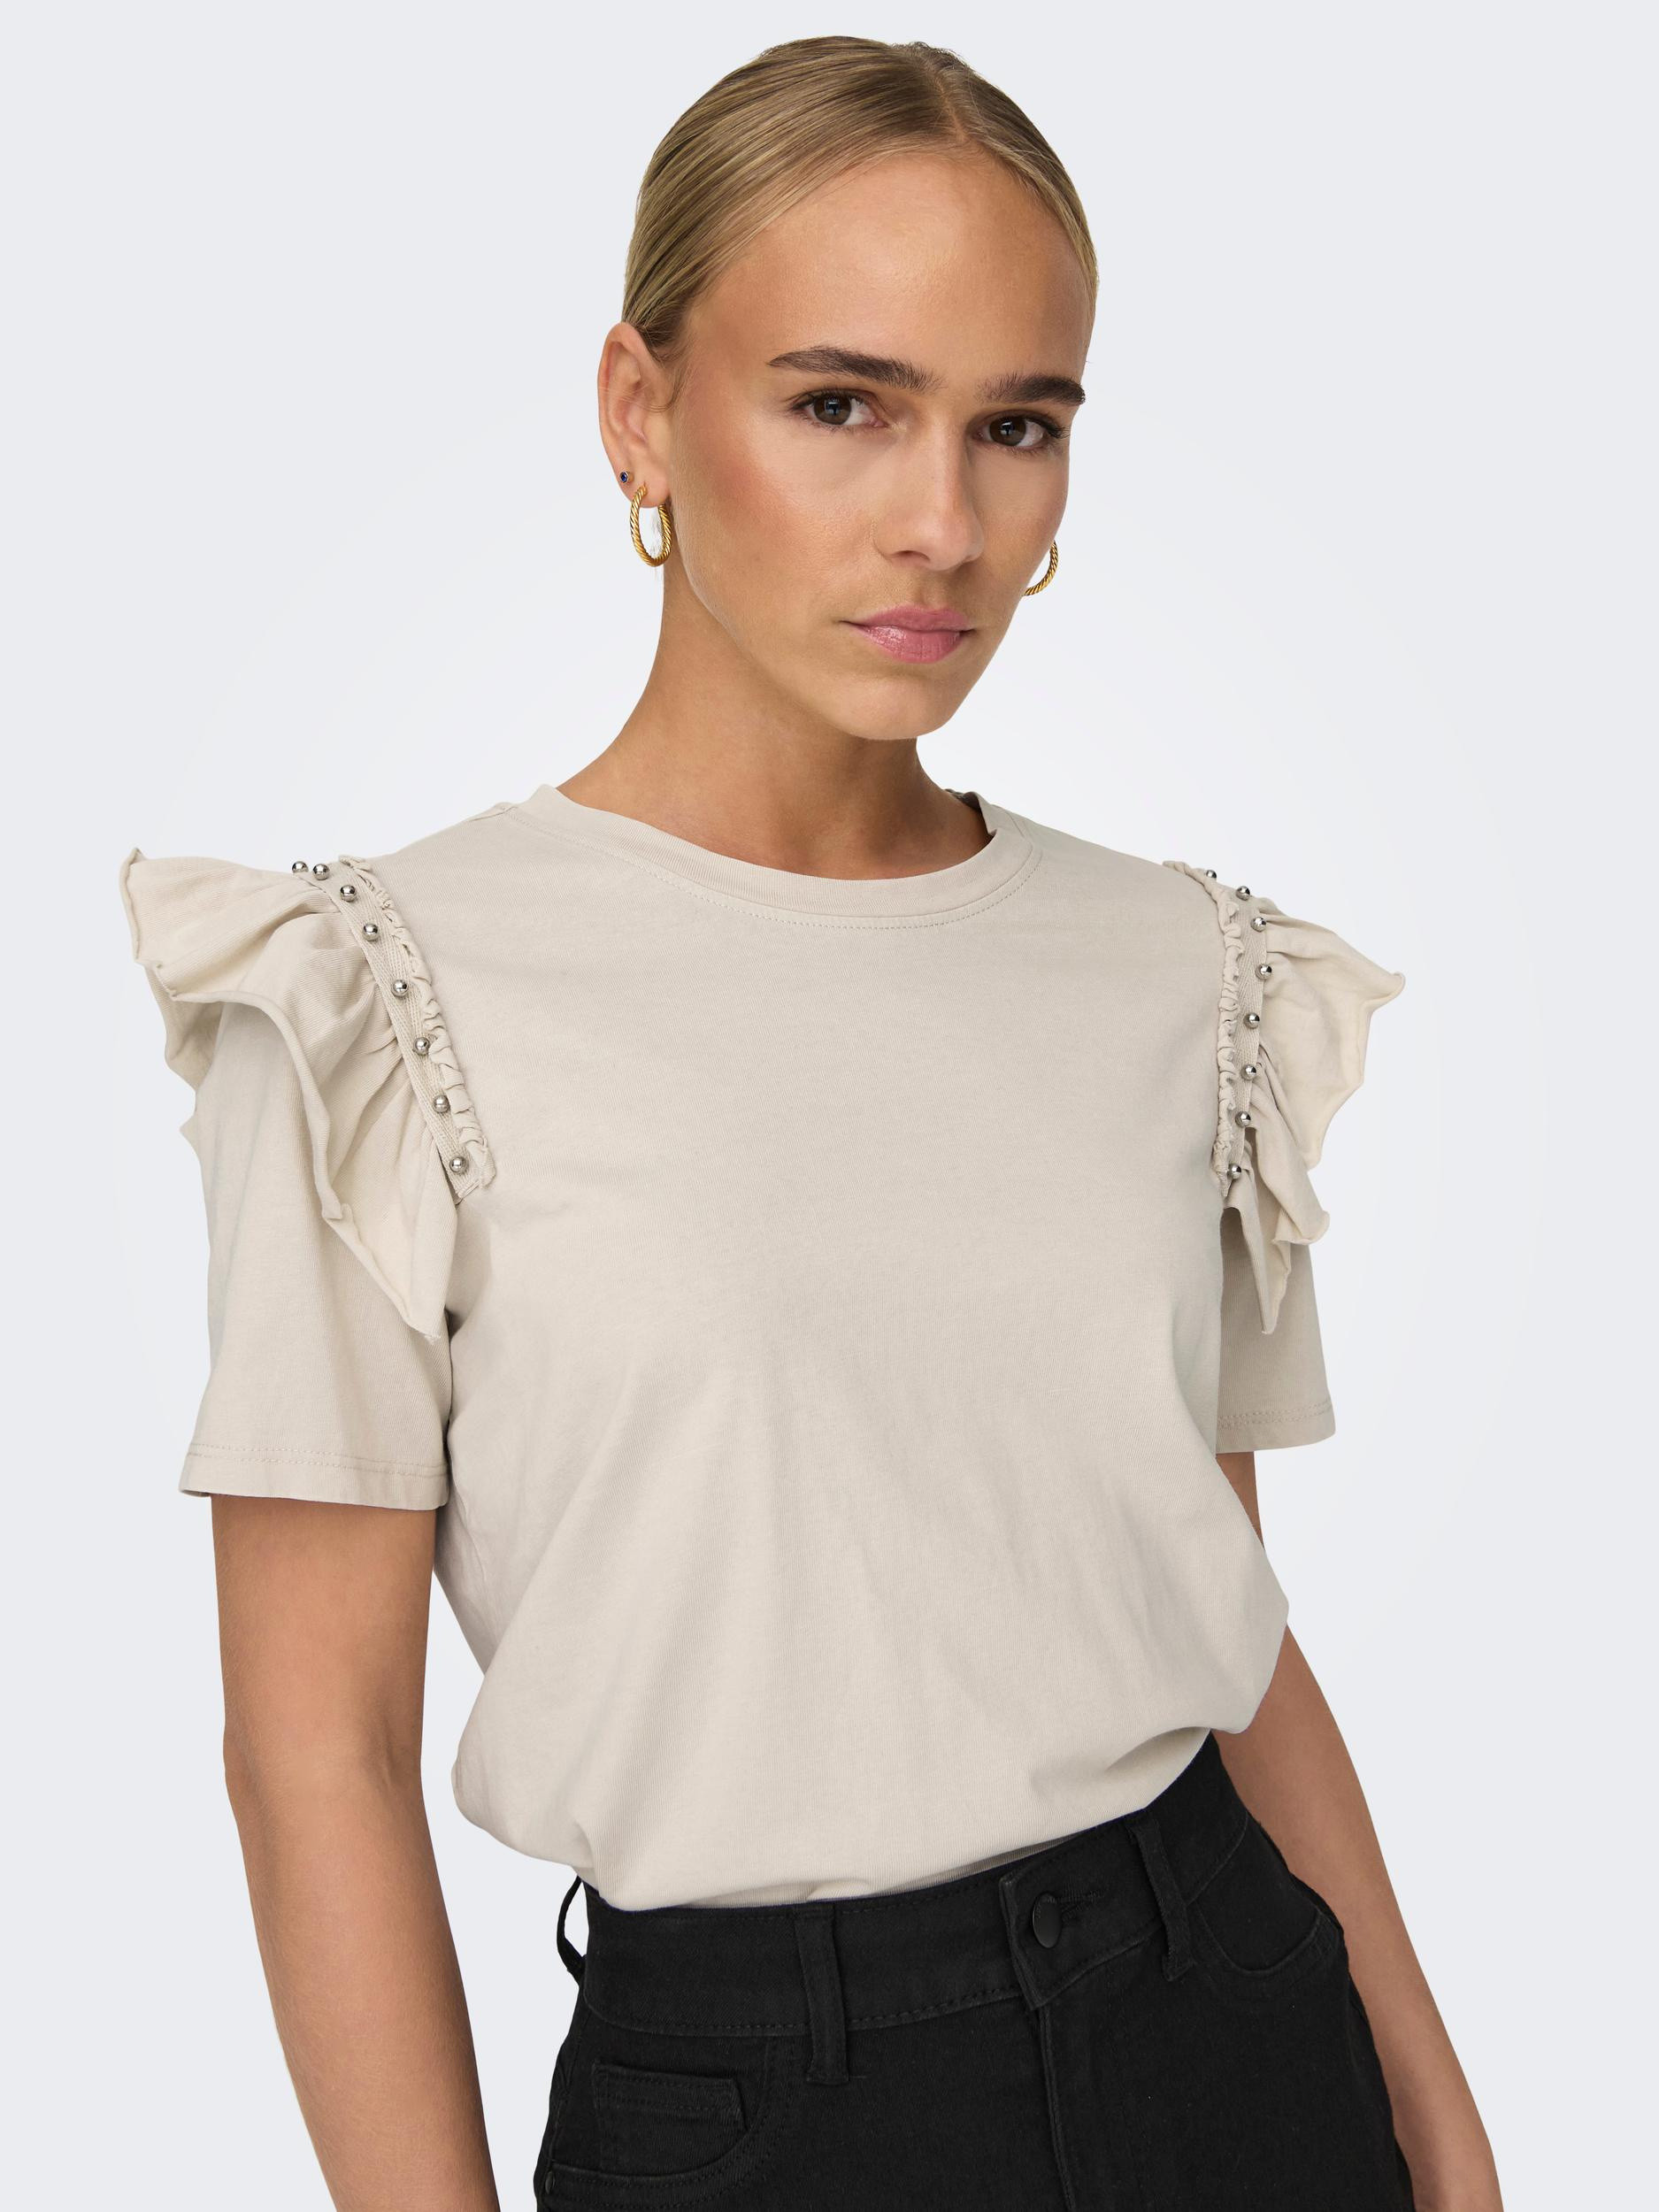 Only - Regular fit cotton T-shirt with ruffles, Beige, large image number 4